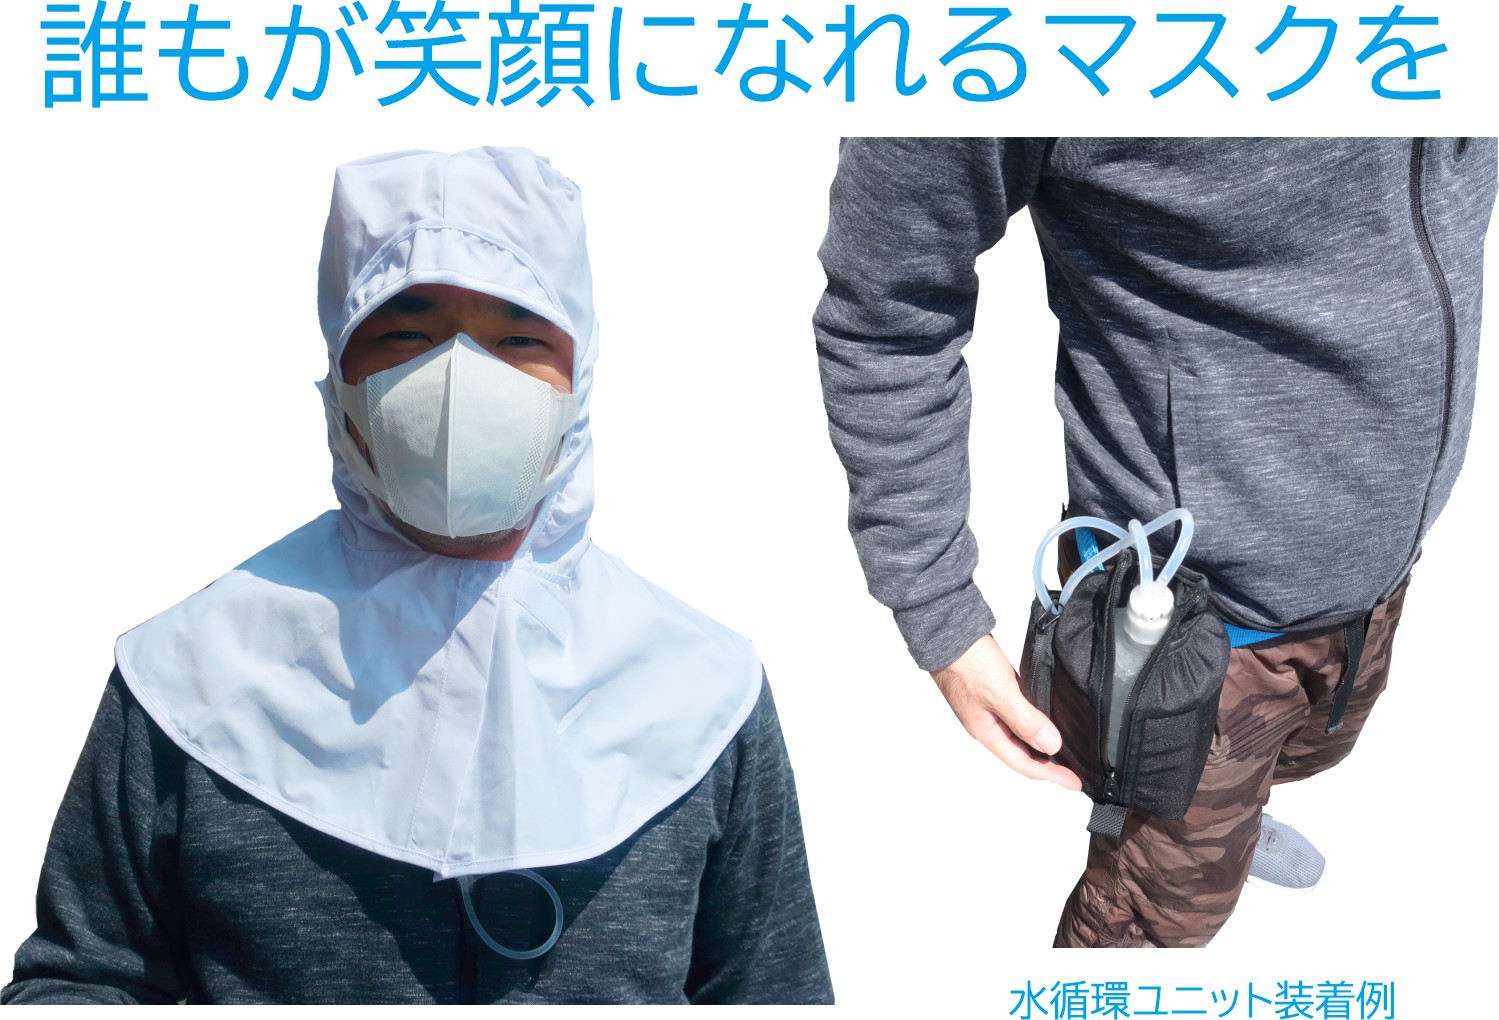 The mask air conditioner cools the body temperature from the body